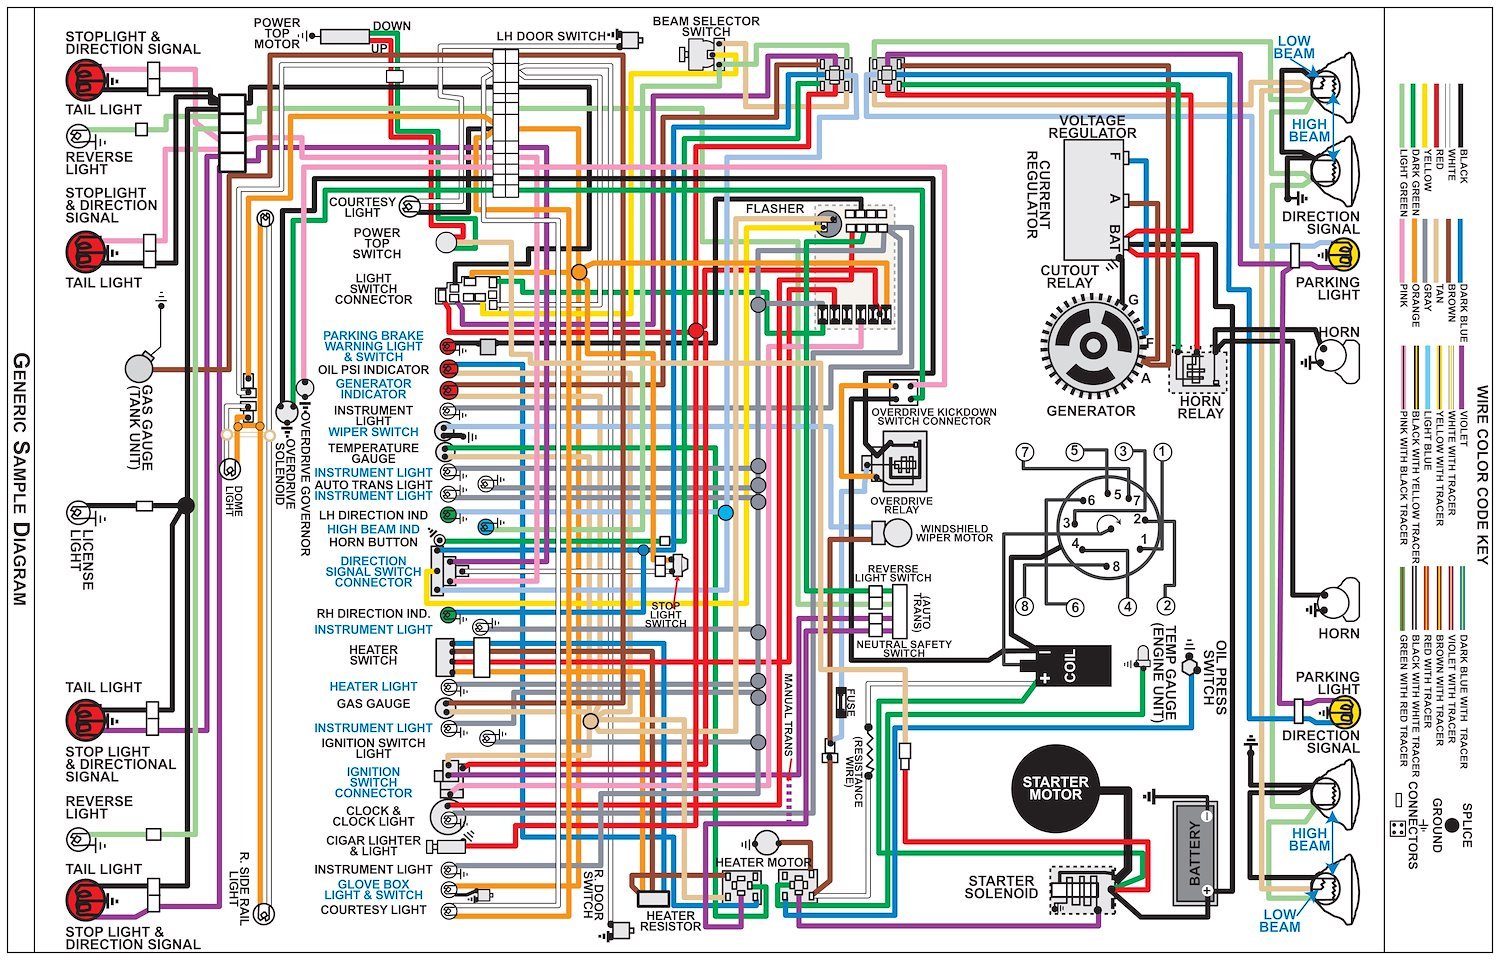 Wiring Diagram for 1979 Dodge D, W Series Trucks, 11 in x 17 in., Laminated